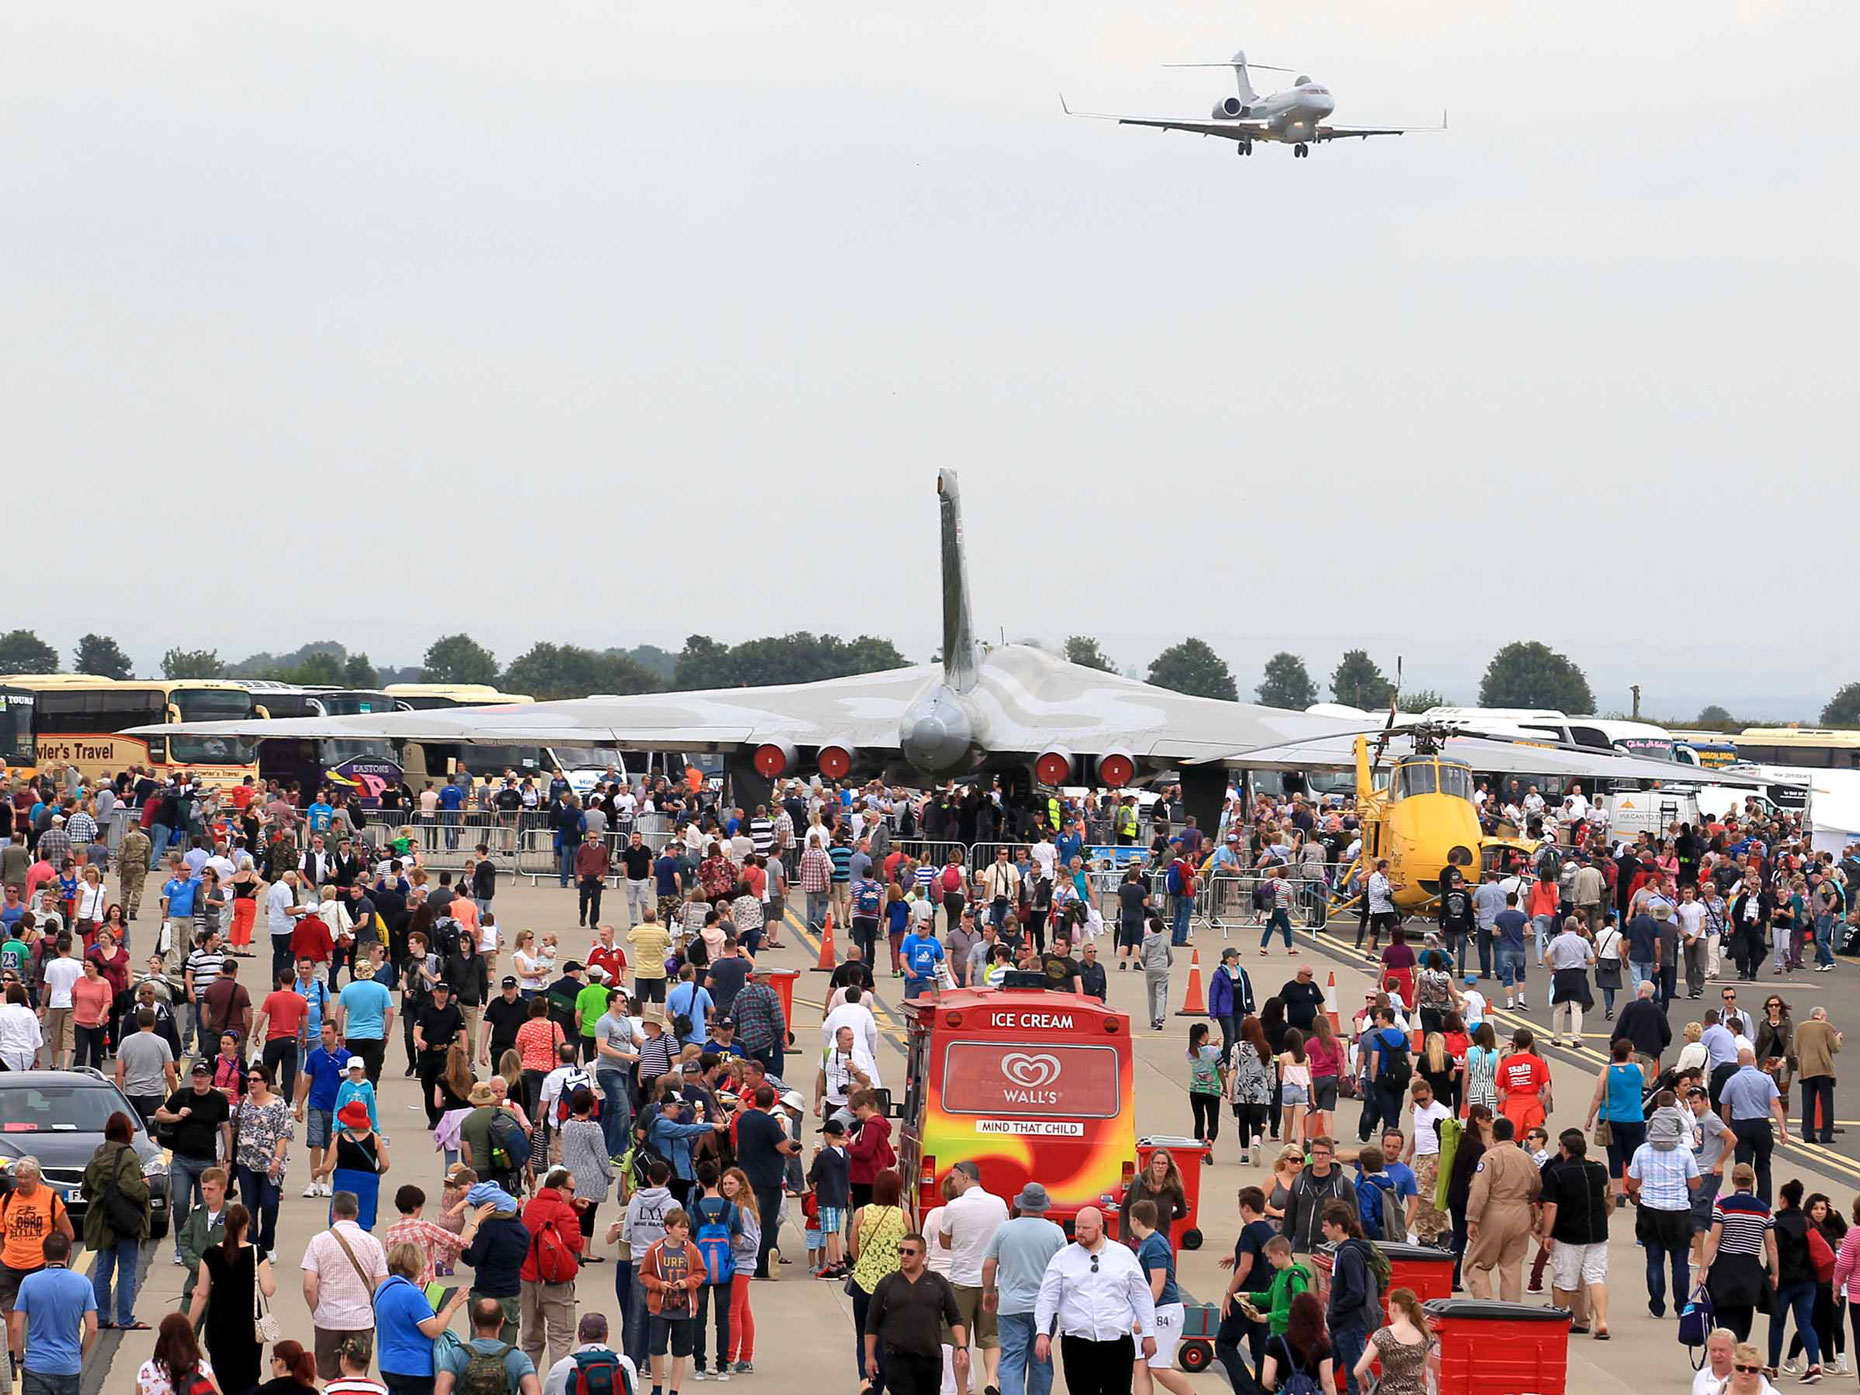 More than 135,000 people attended over the two days of the 2014 Waddington Air Show. Photo: SAC Lauren Pope